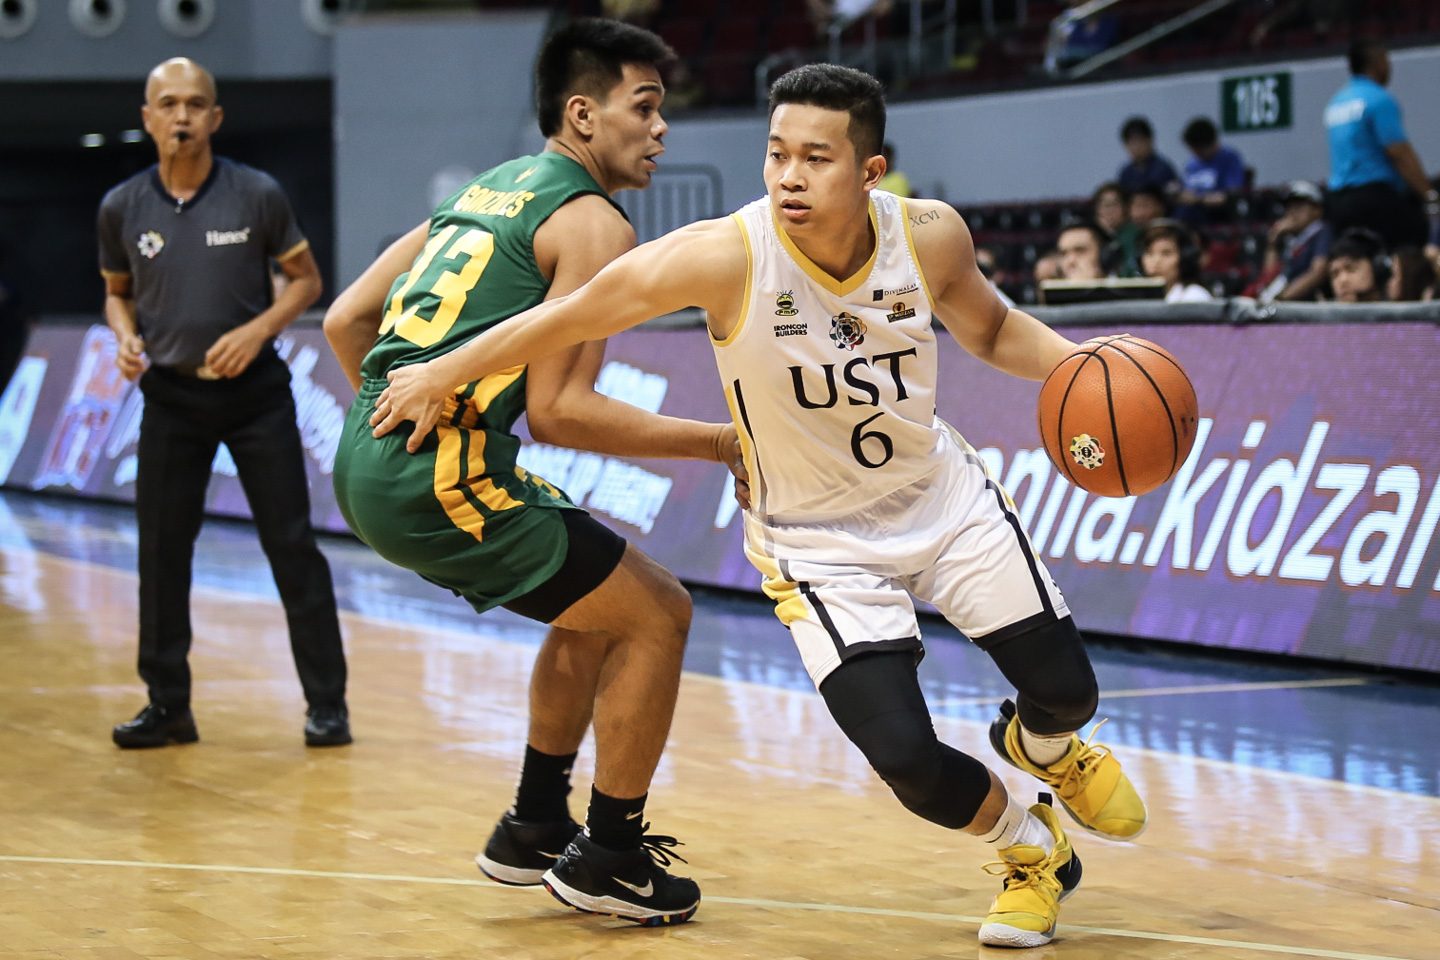 UST captain Marvin Lee to skip final UAAP season for MPBL